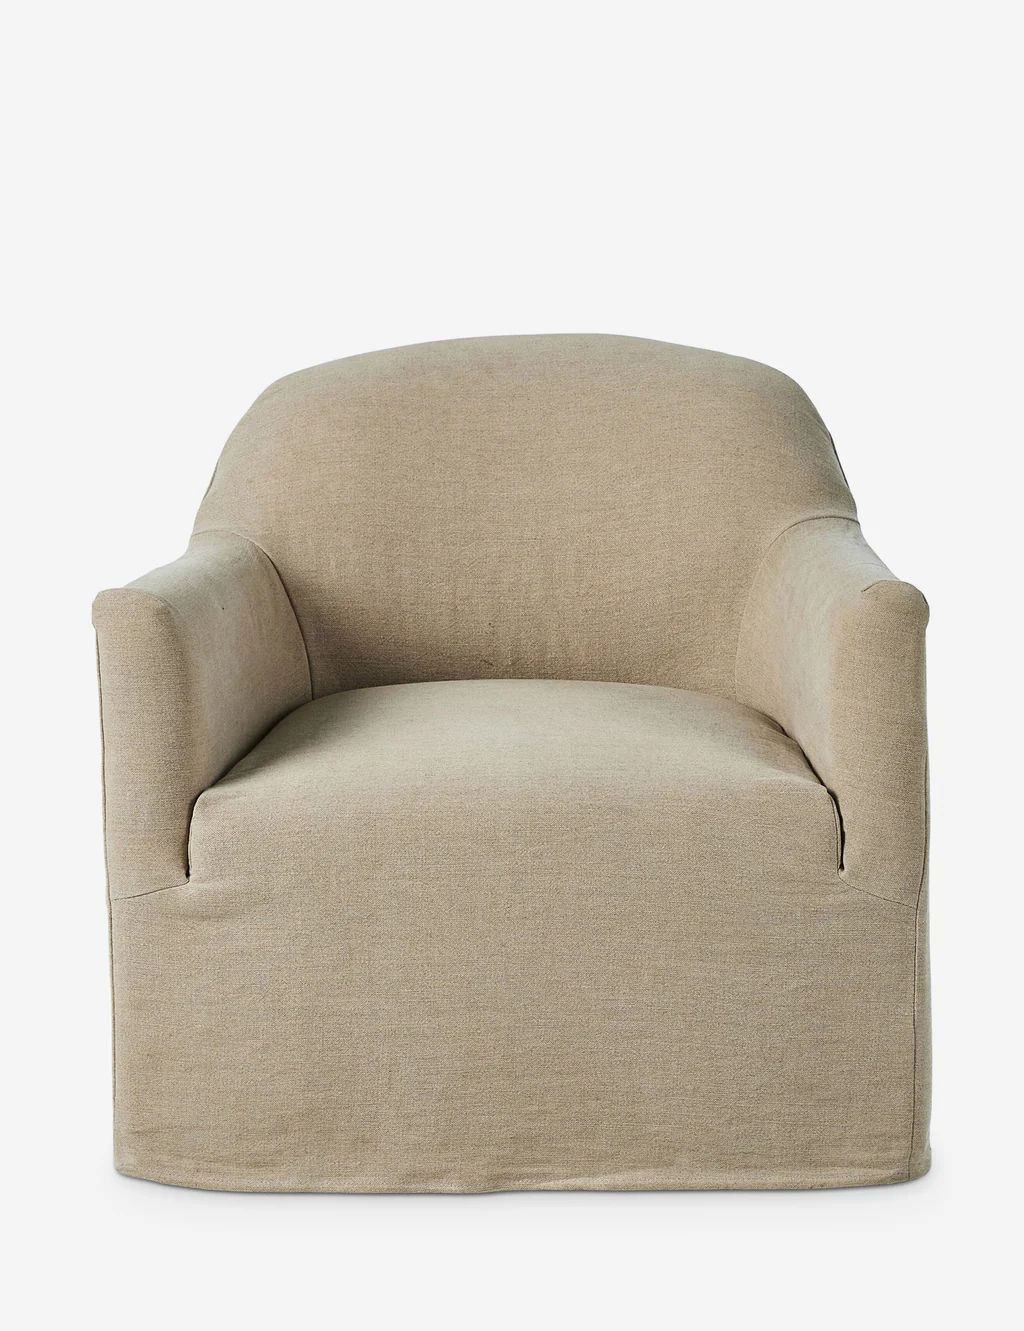 Lowell Slipcover Swivel Chair by Amber Lewis x Four Hands | Lulu and Georgia 